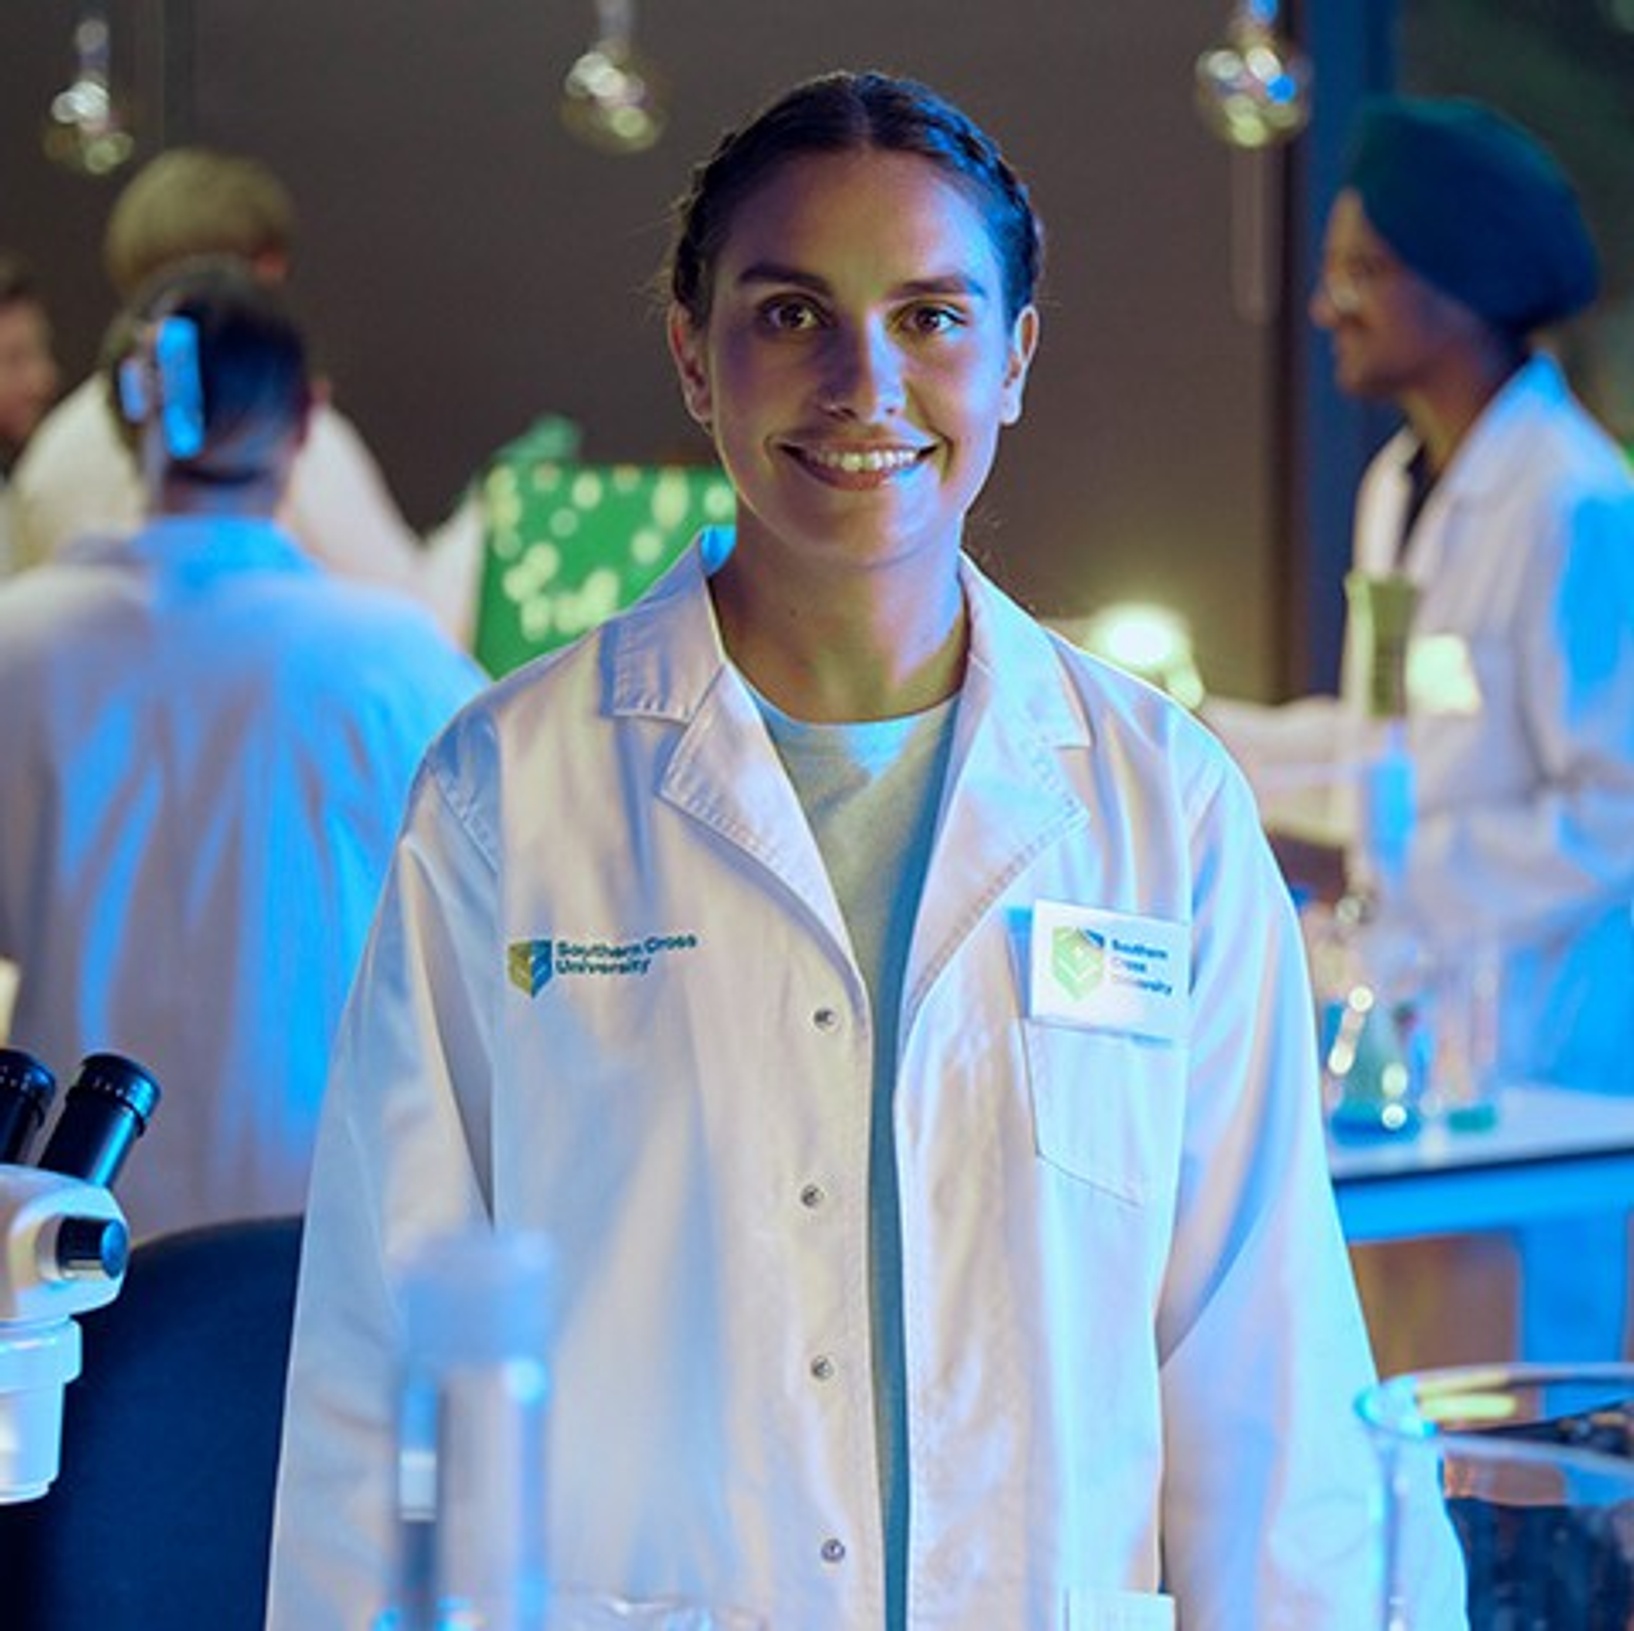 Ashlee Cable, a Bachelor of Science student, stands in a Southern Cross classroom laboratory with lab coat while her fellow students work behind her surrounded by microscopes, test tubes, screens, and other science equipment.